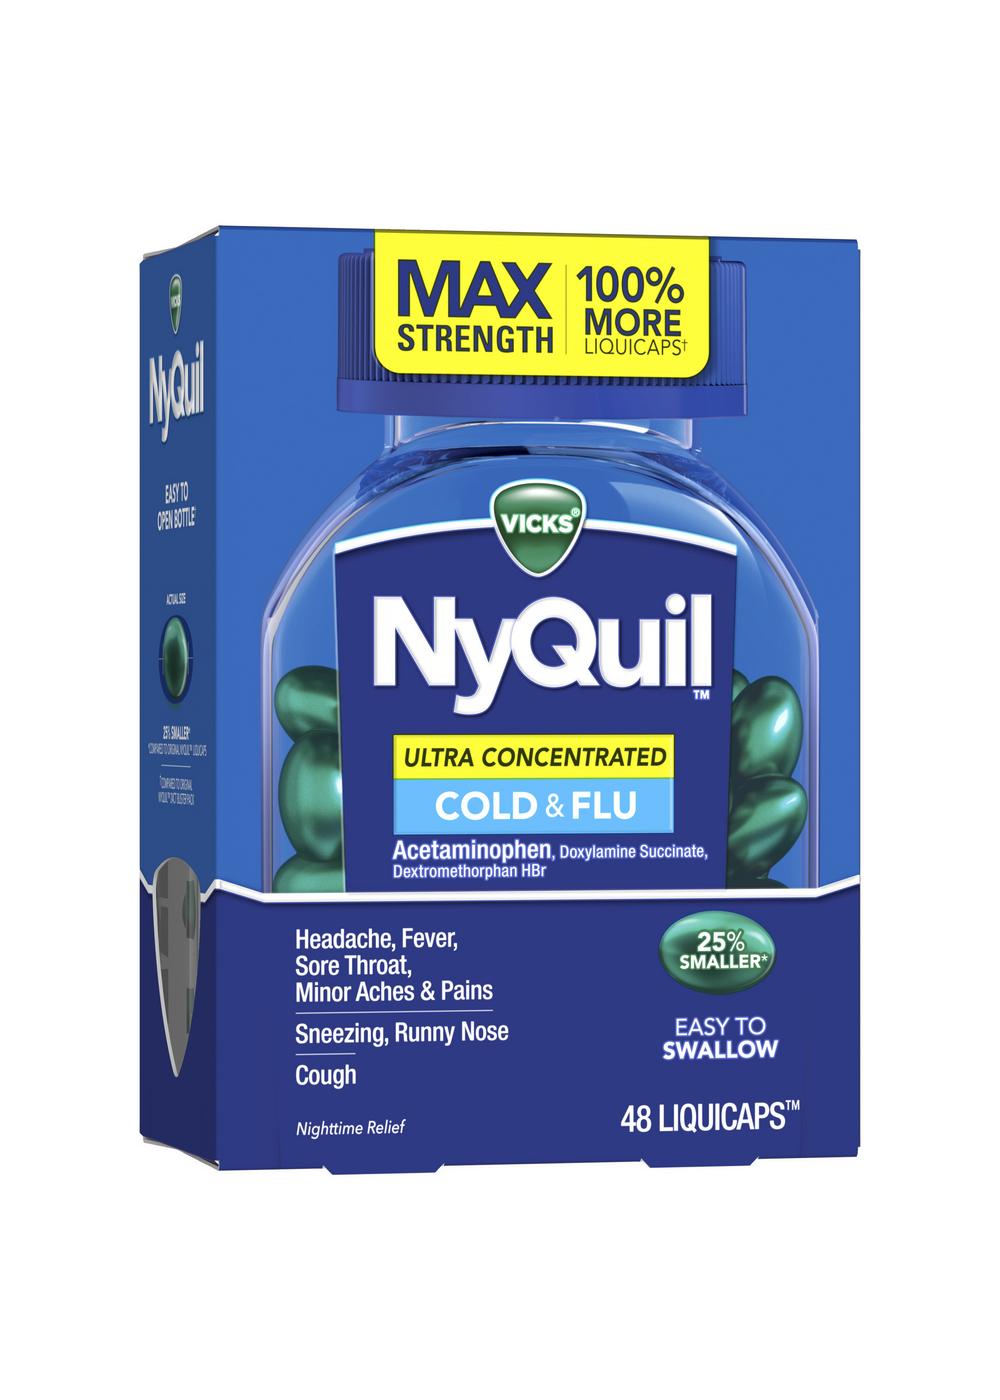 Vicks NyQuil Cold &Flu Liquicaps; image 4 of 6